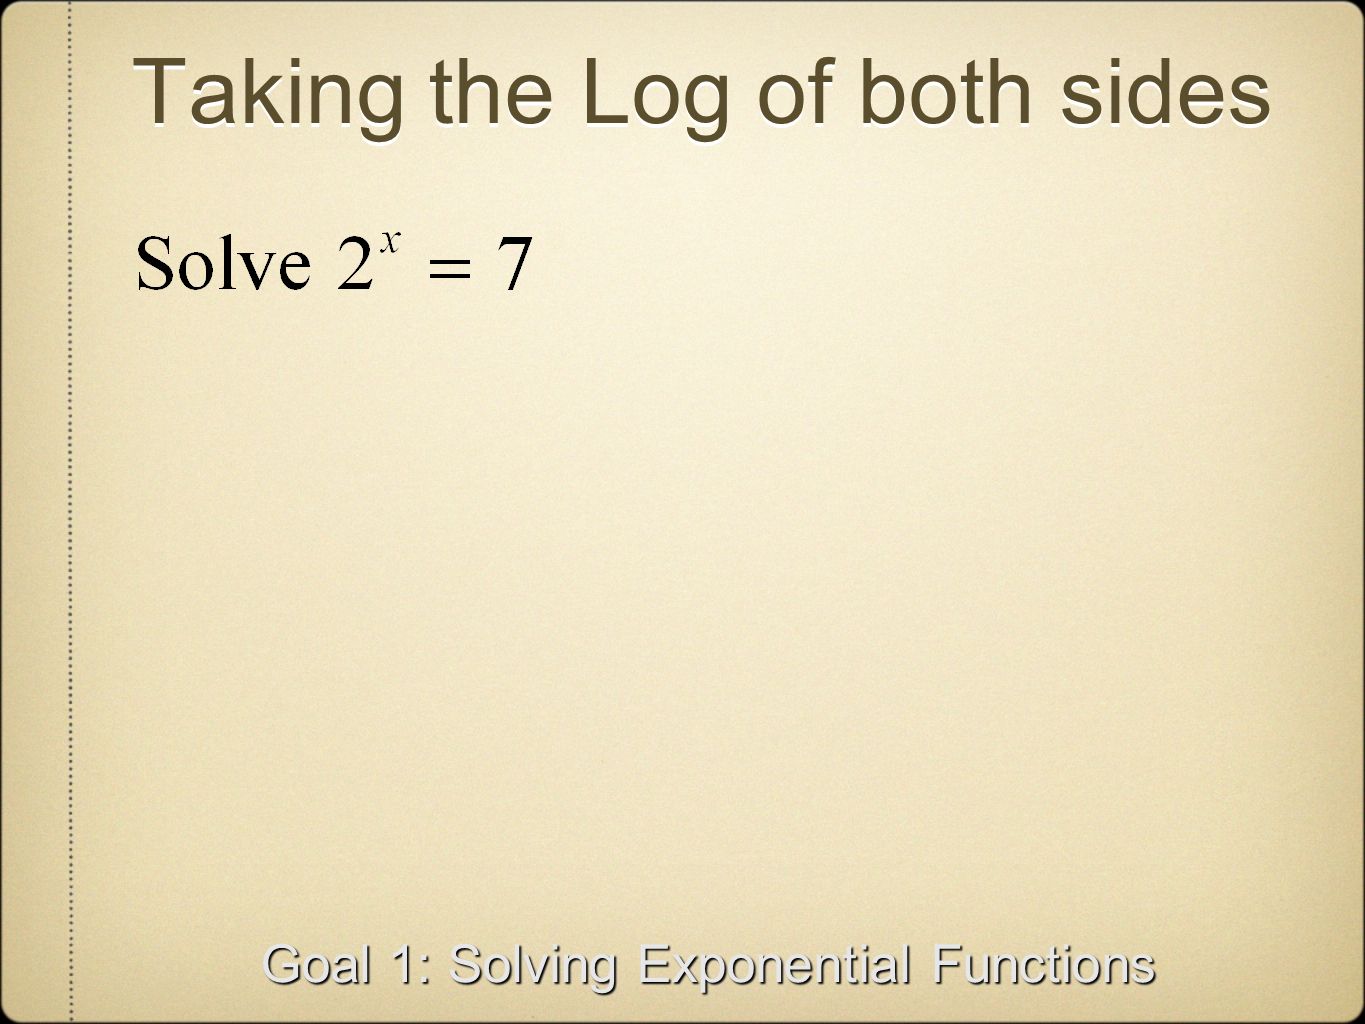 Taking the Log of both sides Goal 1: Solving Exponential Functions